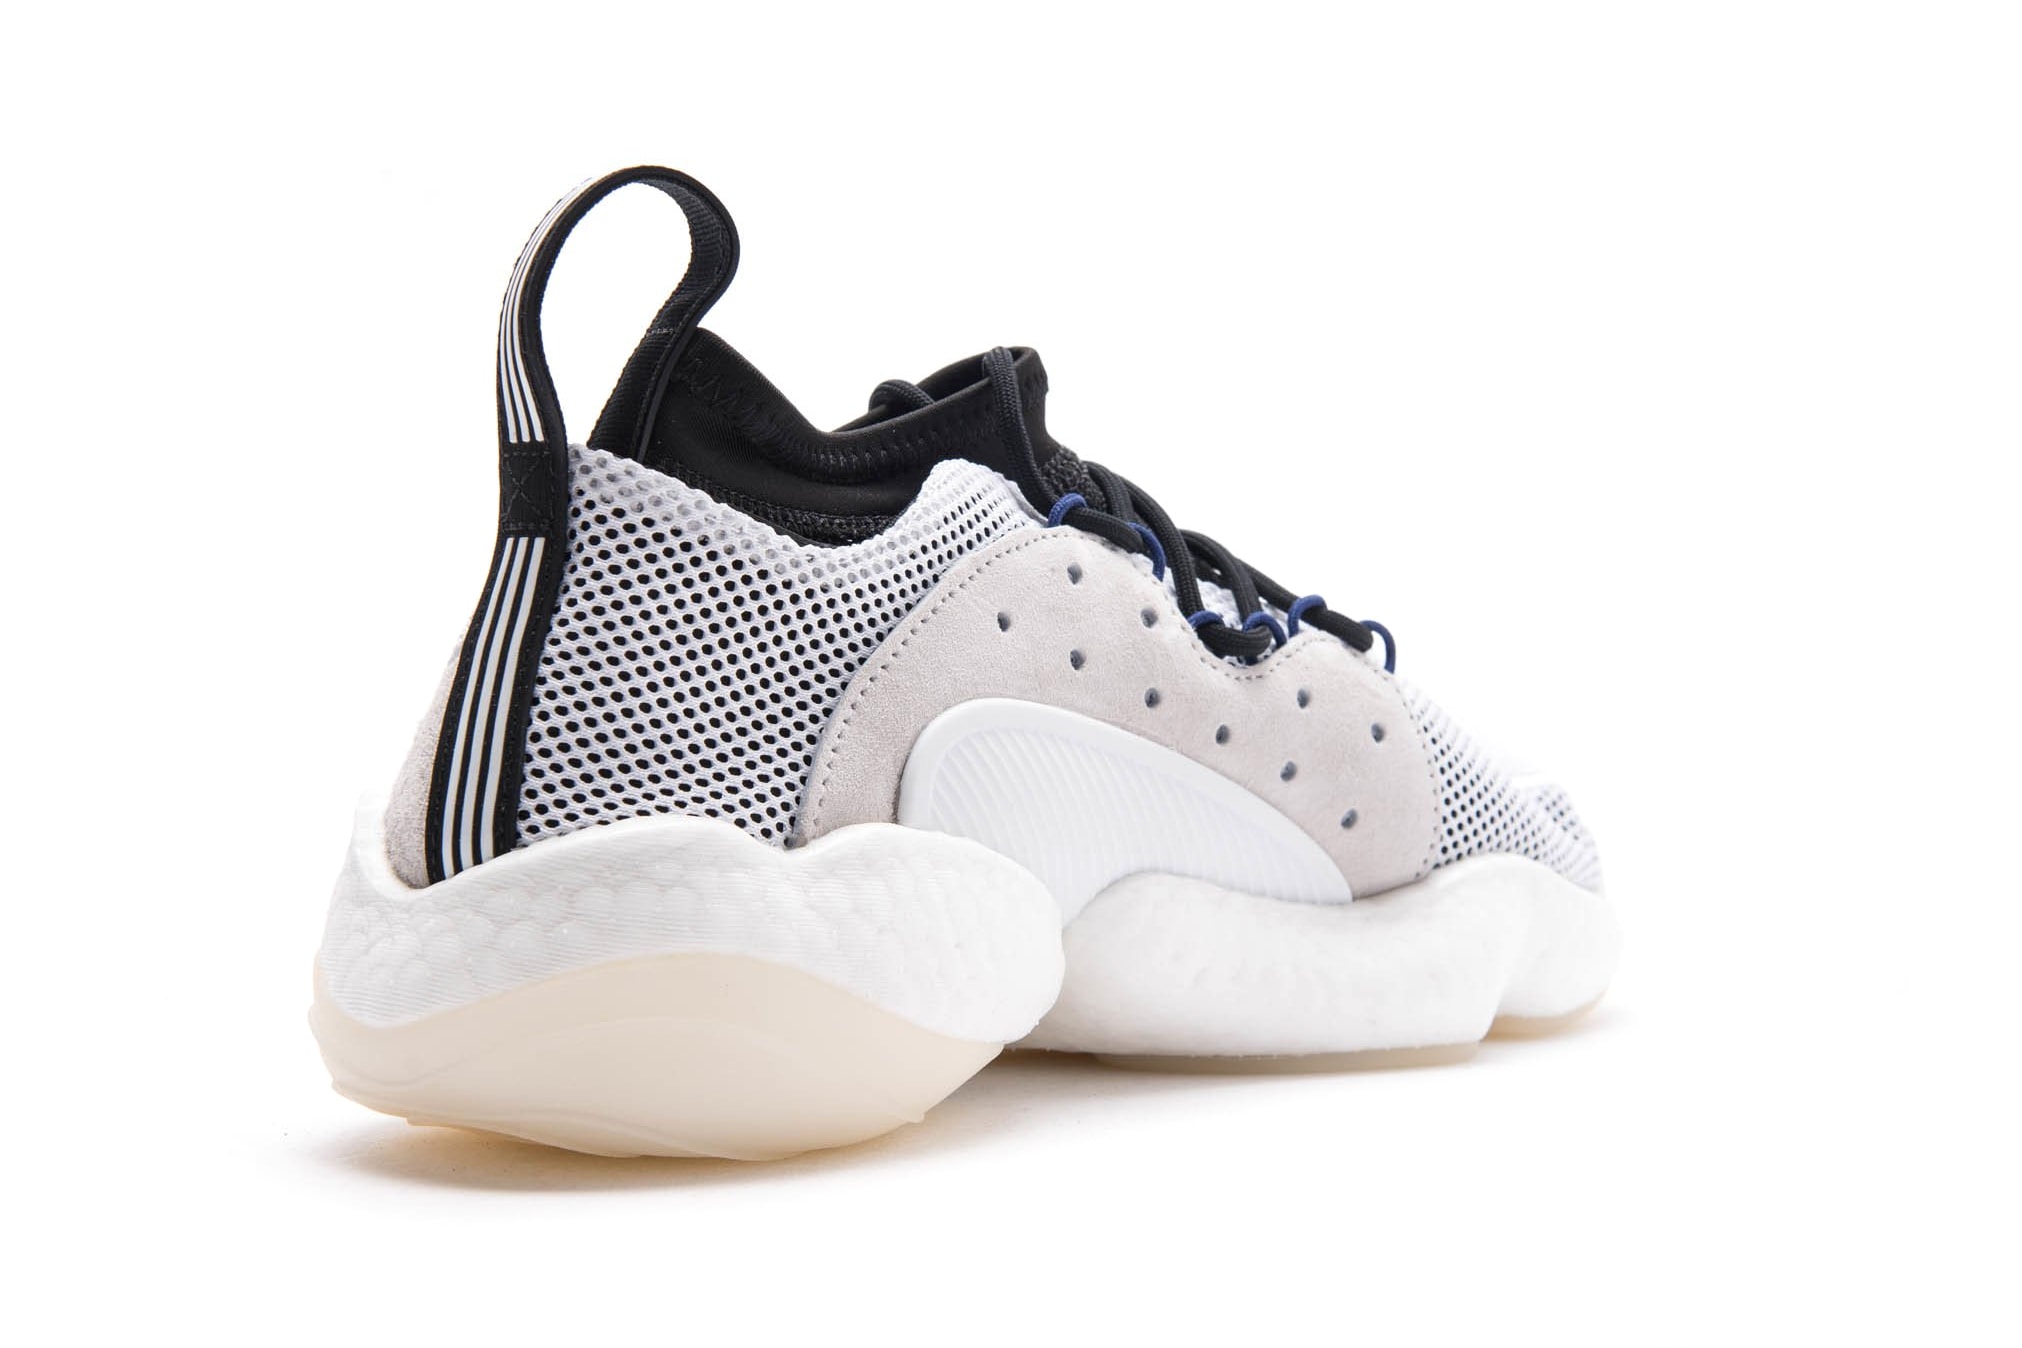 adidas Crazy BYW LVL 2 White Black fall 2018 release sneakers